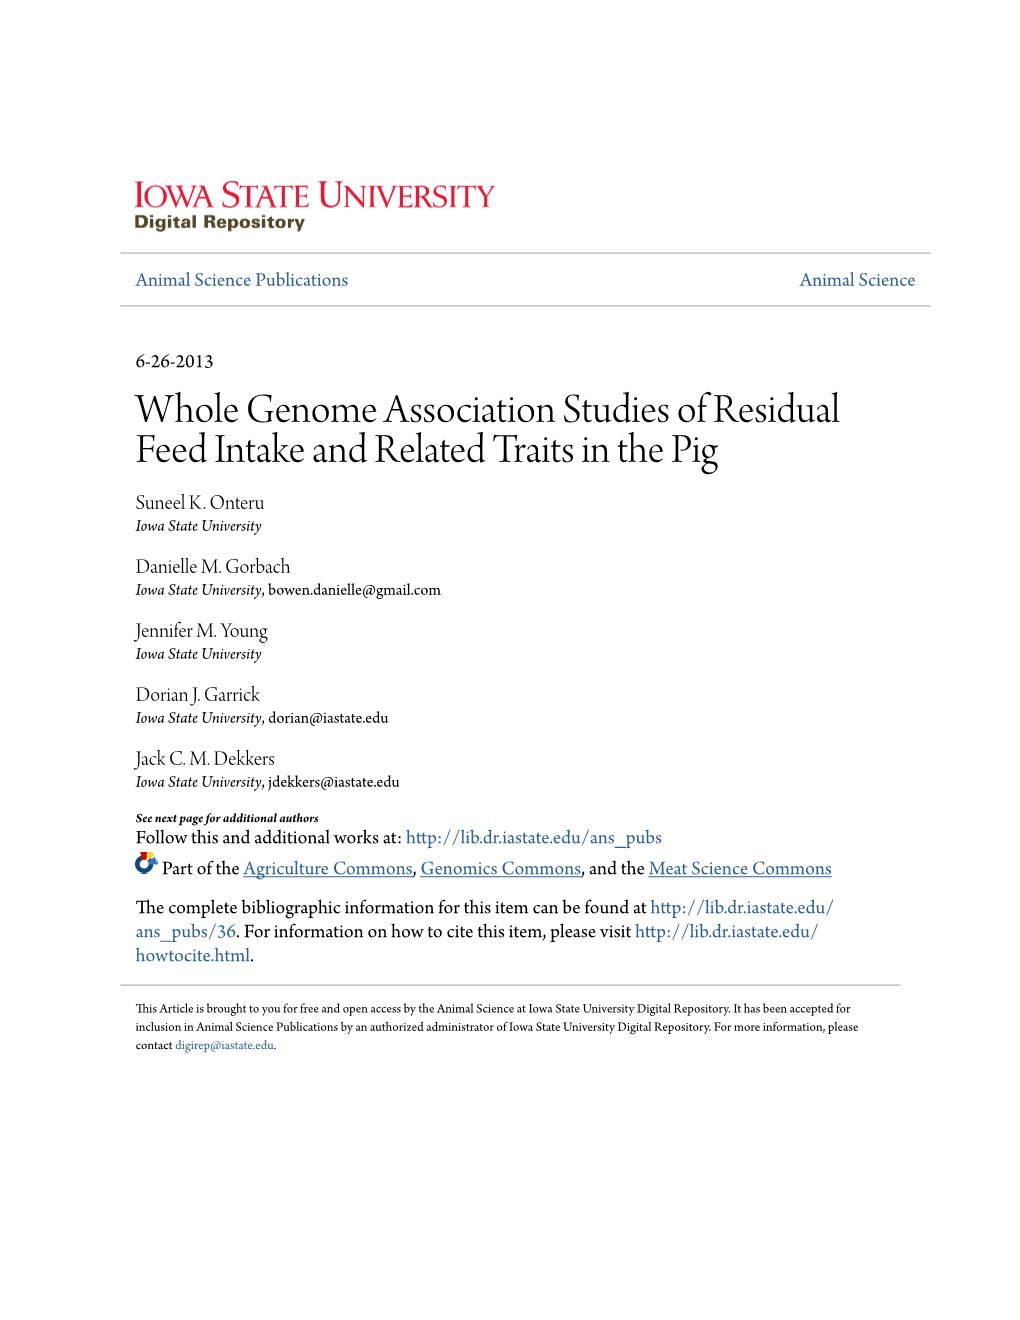 Whole Genome Association Studies of Residual Feed Intake and Related Traits in the Pig Suneel K